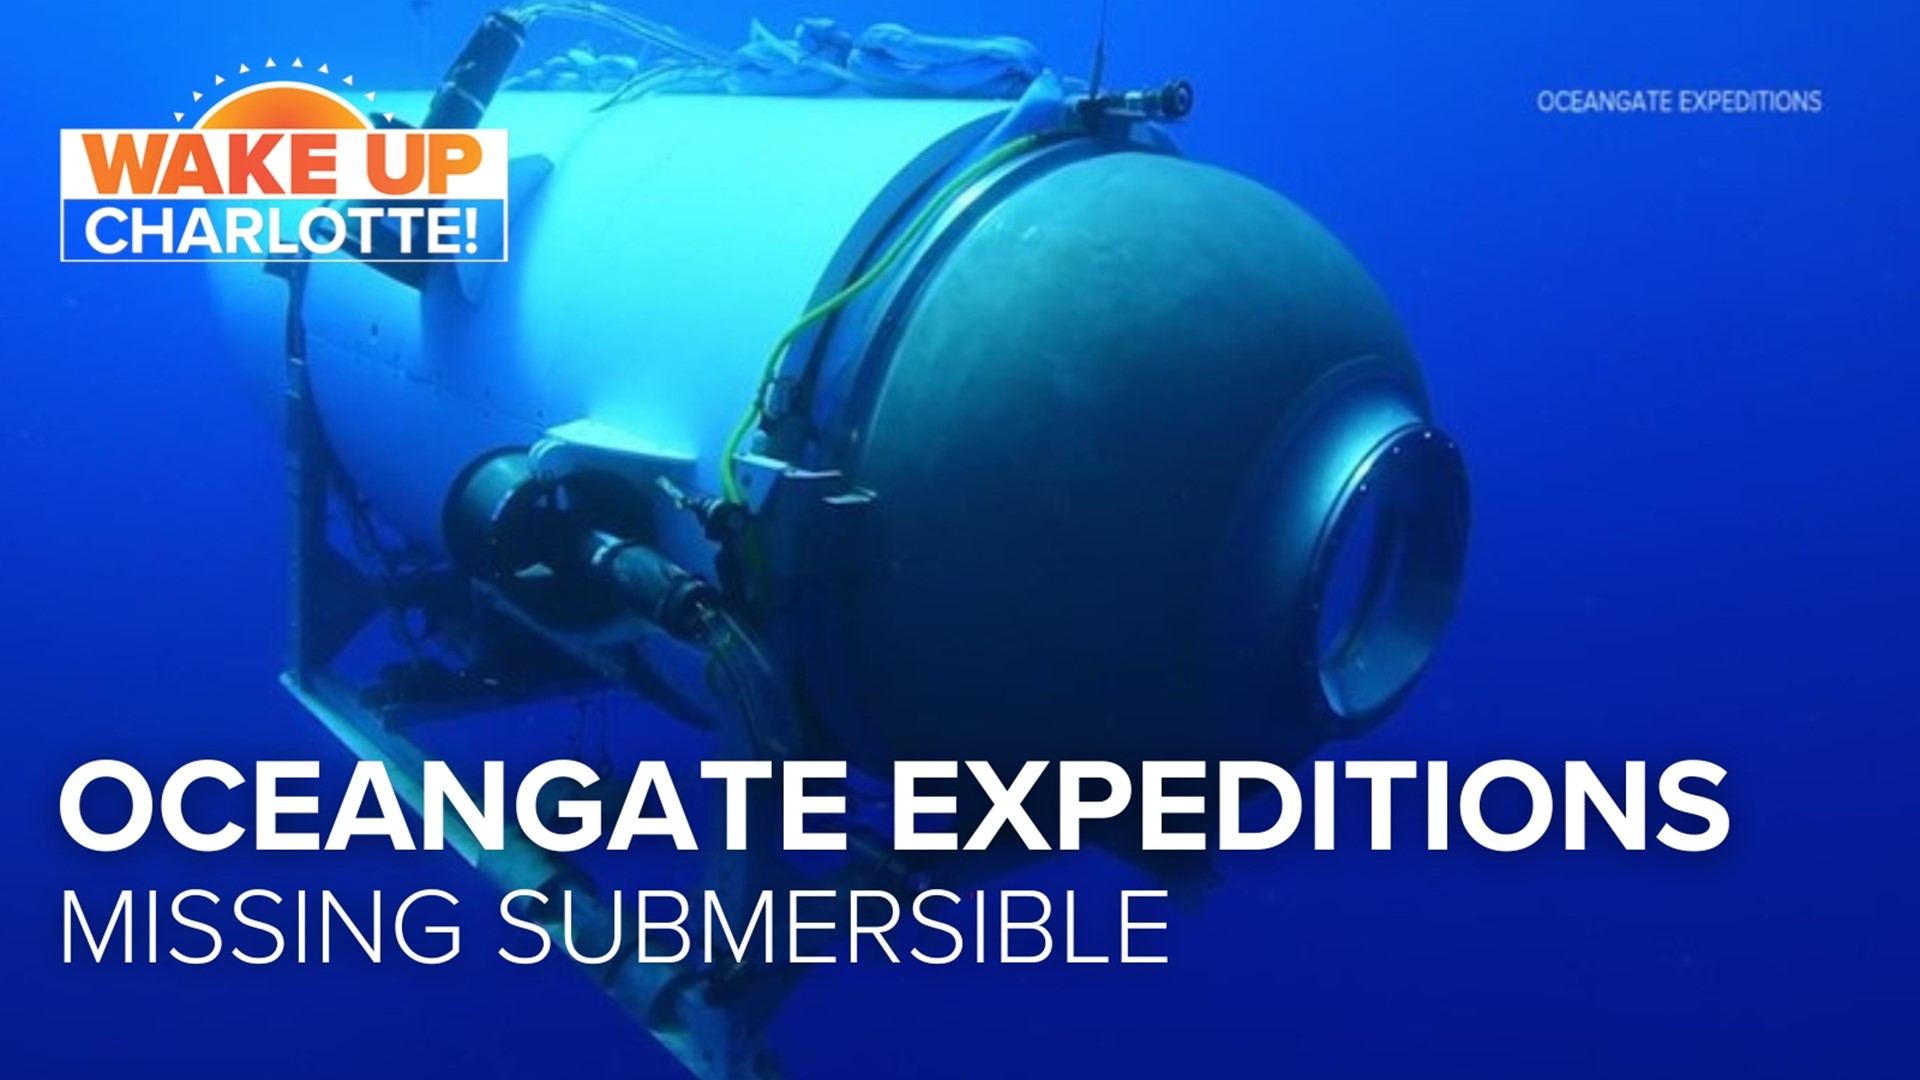 OceanGate Expeditions